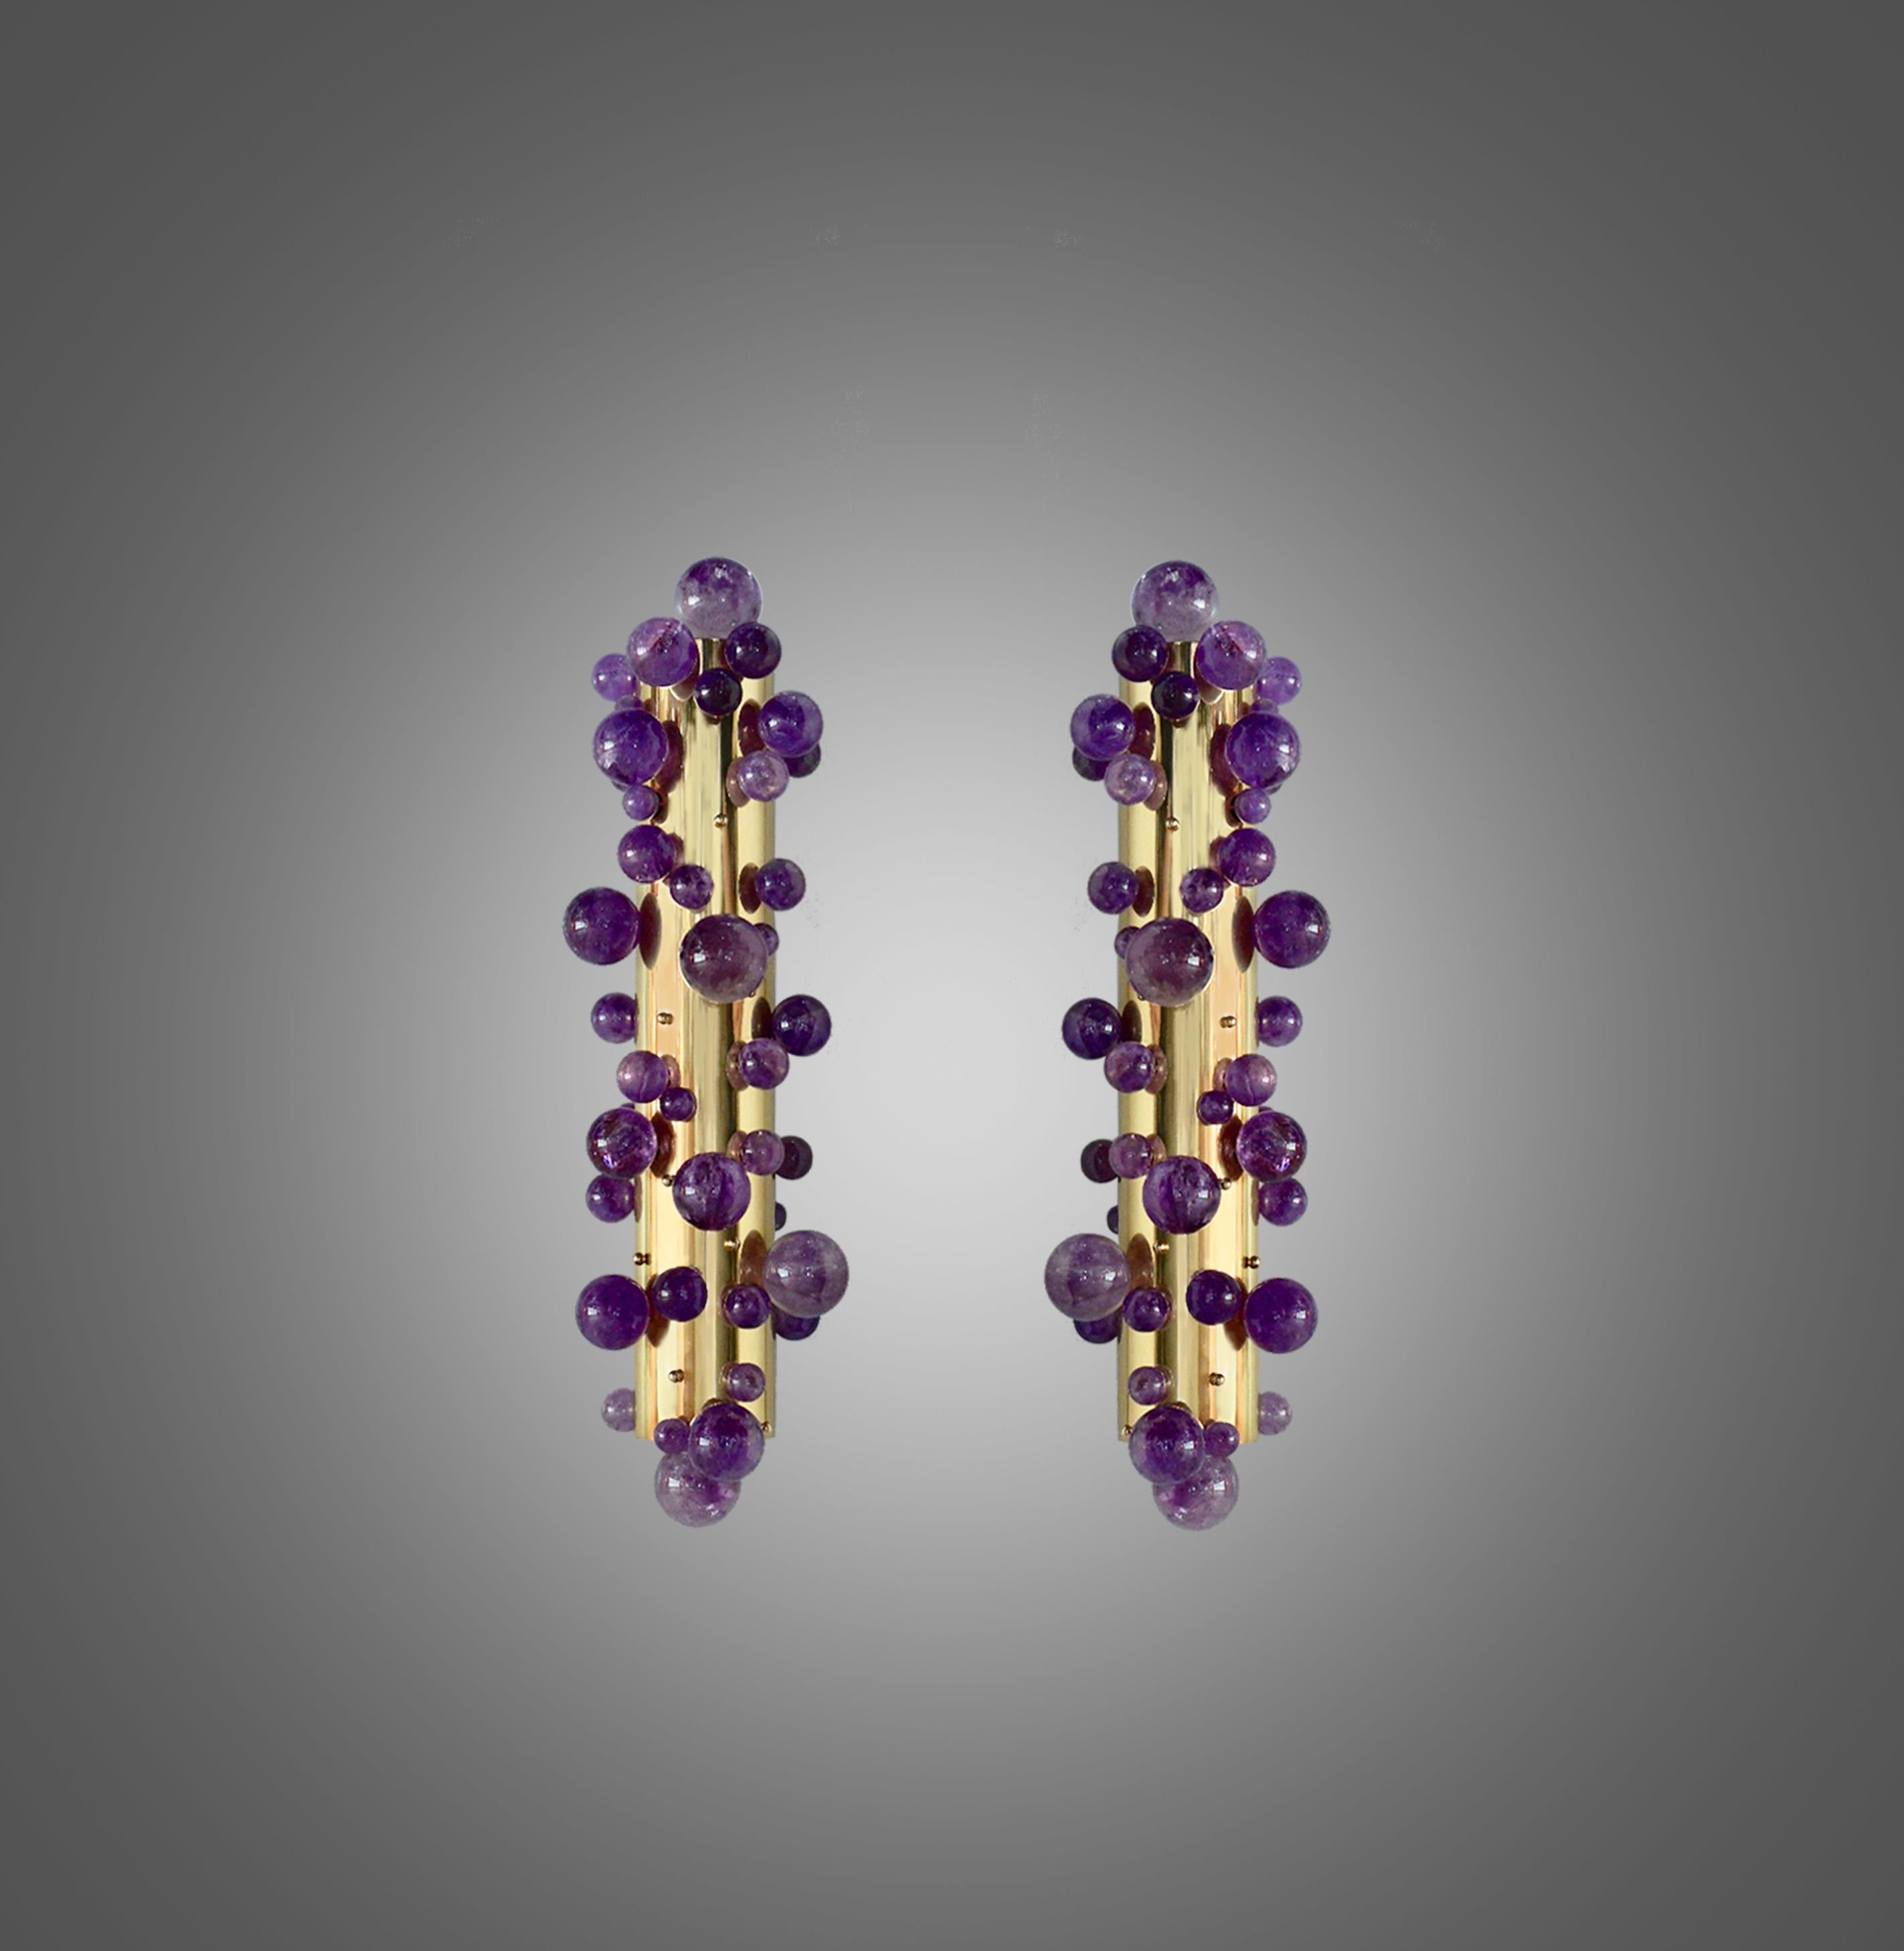 Pair of amethyst bubble sconces with the polished brass finish. Created by Phoenix gallery NYC.
Each sconce installed two sockets. Use two 80w LED warm light bulbs. Total 160w max. Light bulbs included. 
Custom size upon request.
Recommend J-box